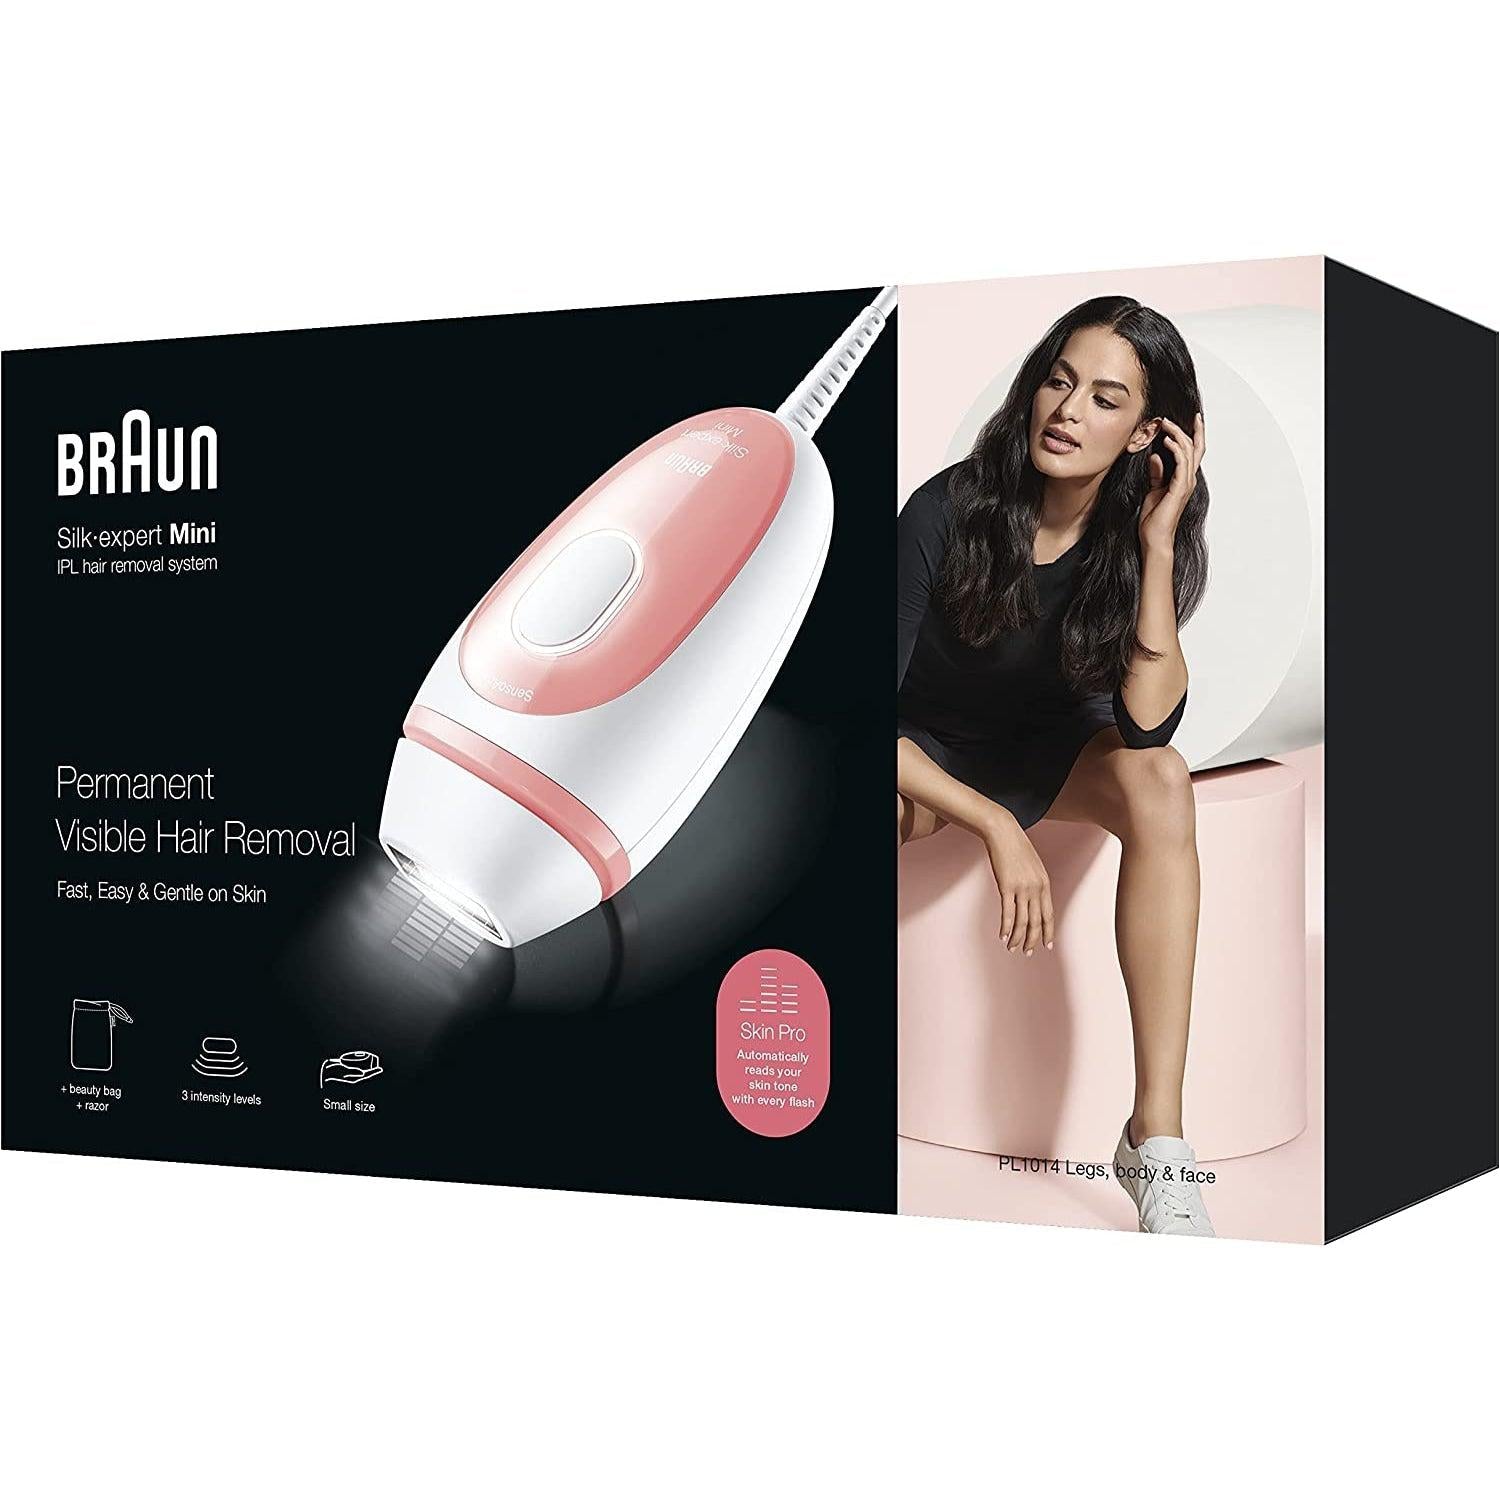  Braun IPL Long-Lasting Hair Removal for Women and Men, Silk  Expert Mini PL1014 with Venus Razor, Long-Lasting Hair Reducation in Hair  Regrowth for Body & Face, Corded : Beauty & Personal